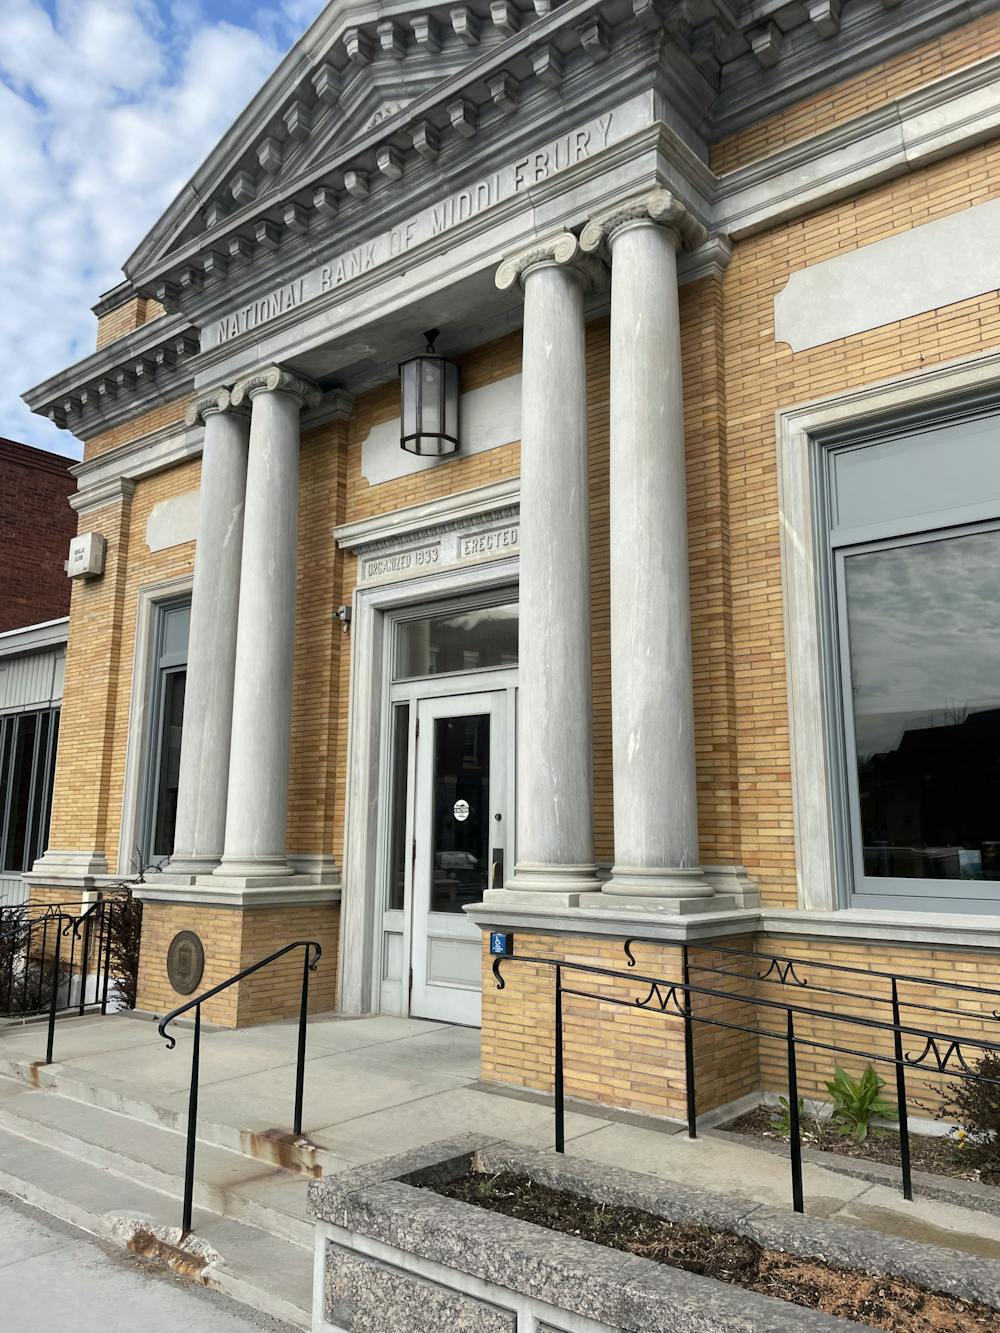 The National Bank of Middlebury, located at  30 Main Street, collaborates with the Better Middlebury Partnership on the Middlebury Money initiative.